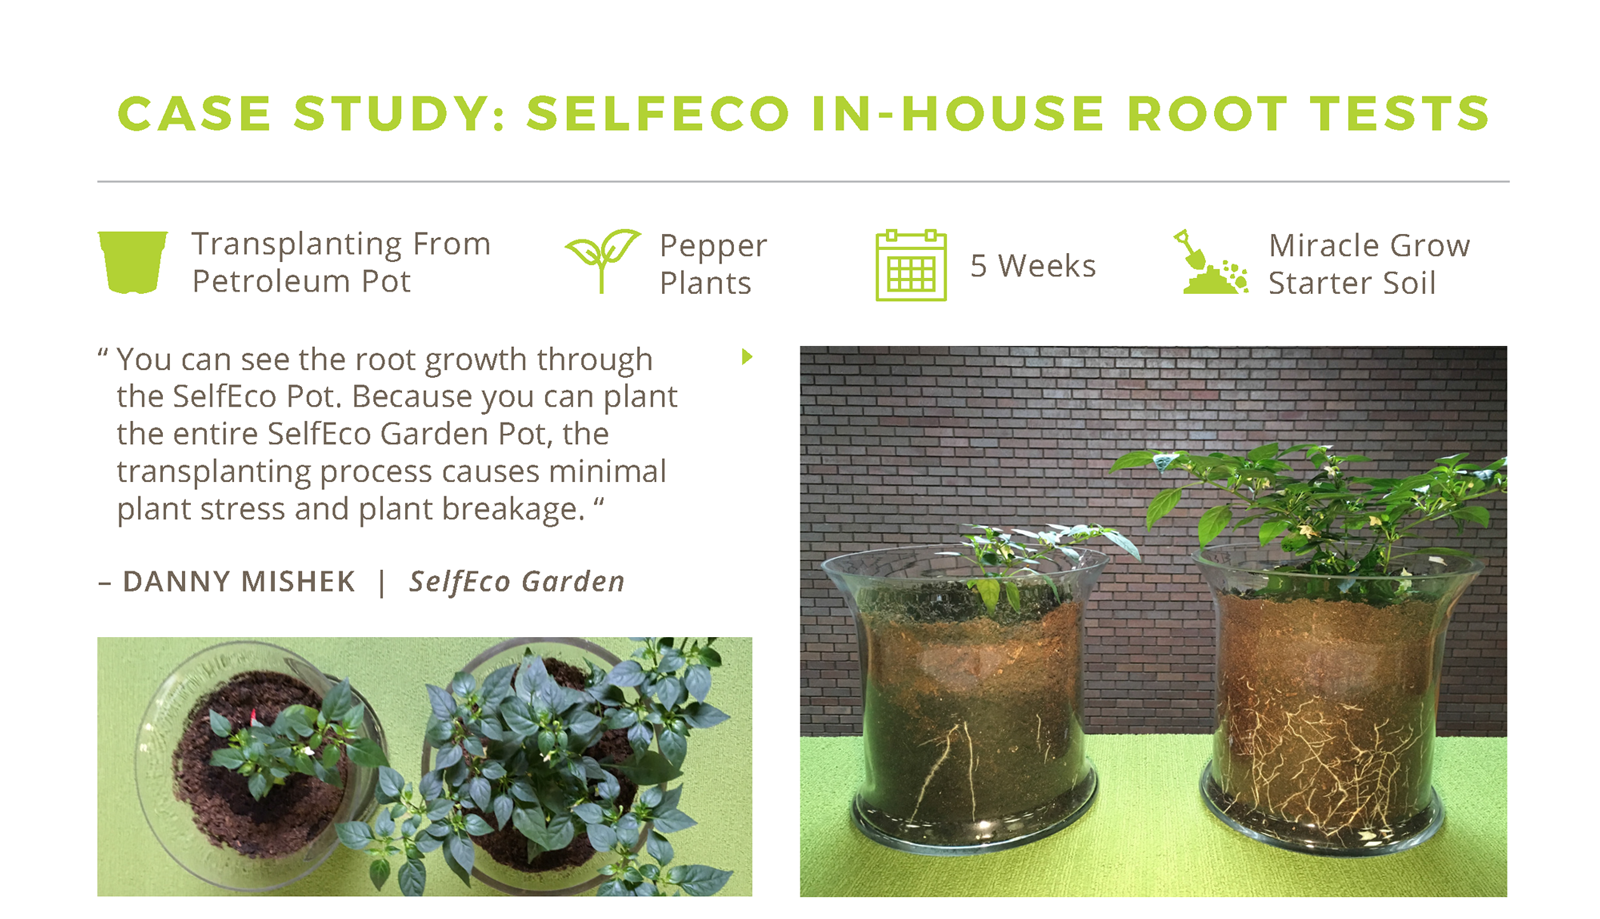 SelfEco Garden Results Sheet: In-House Root Tests